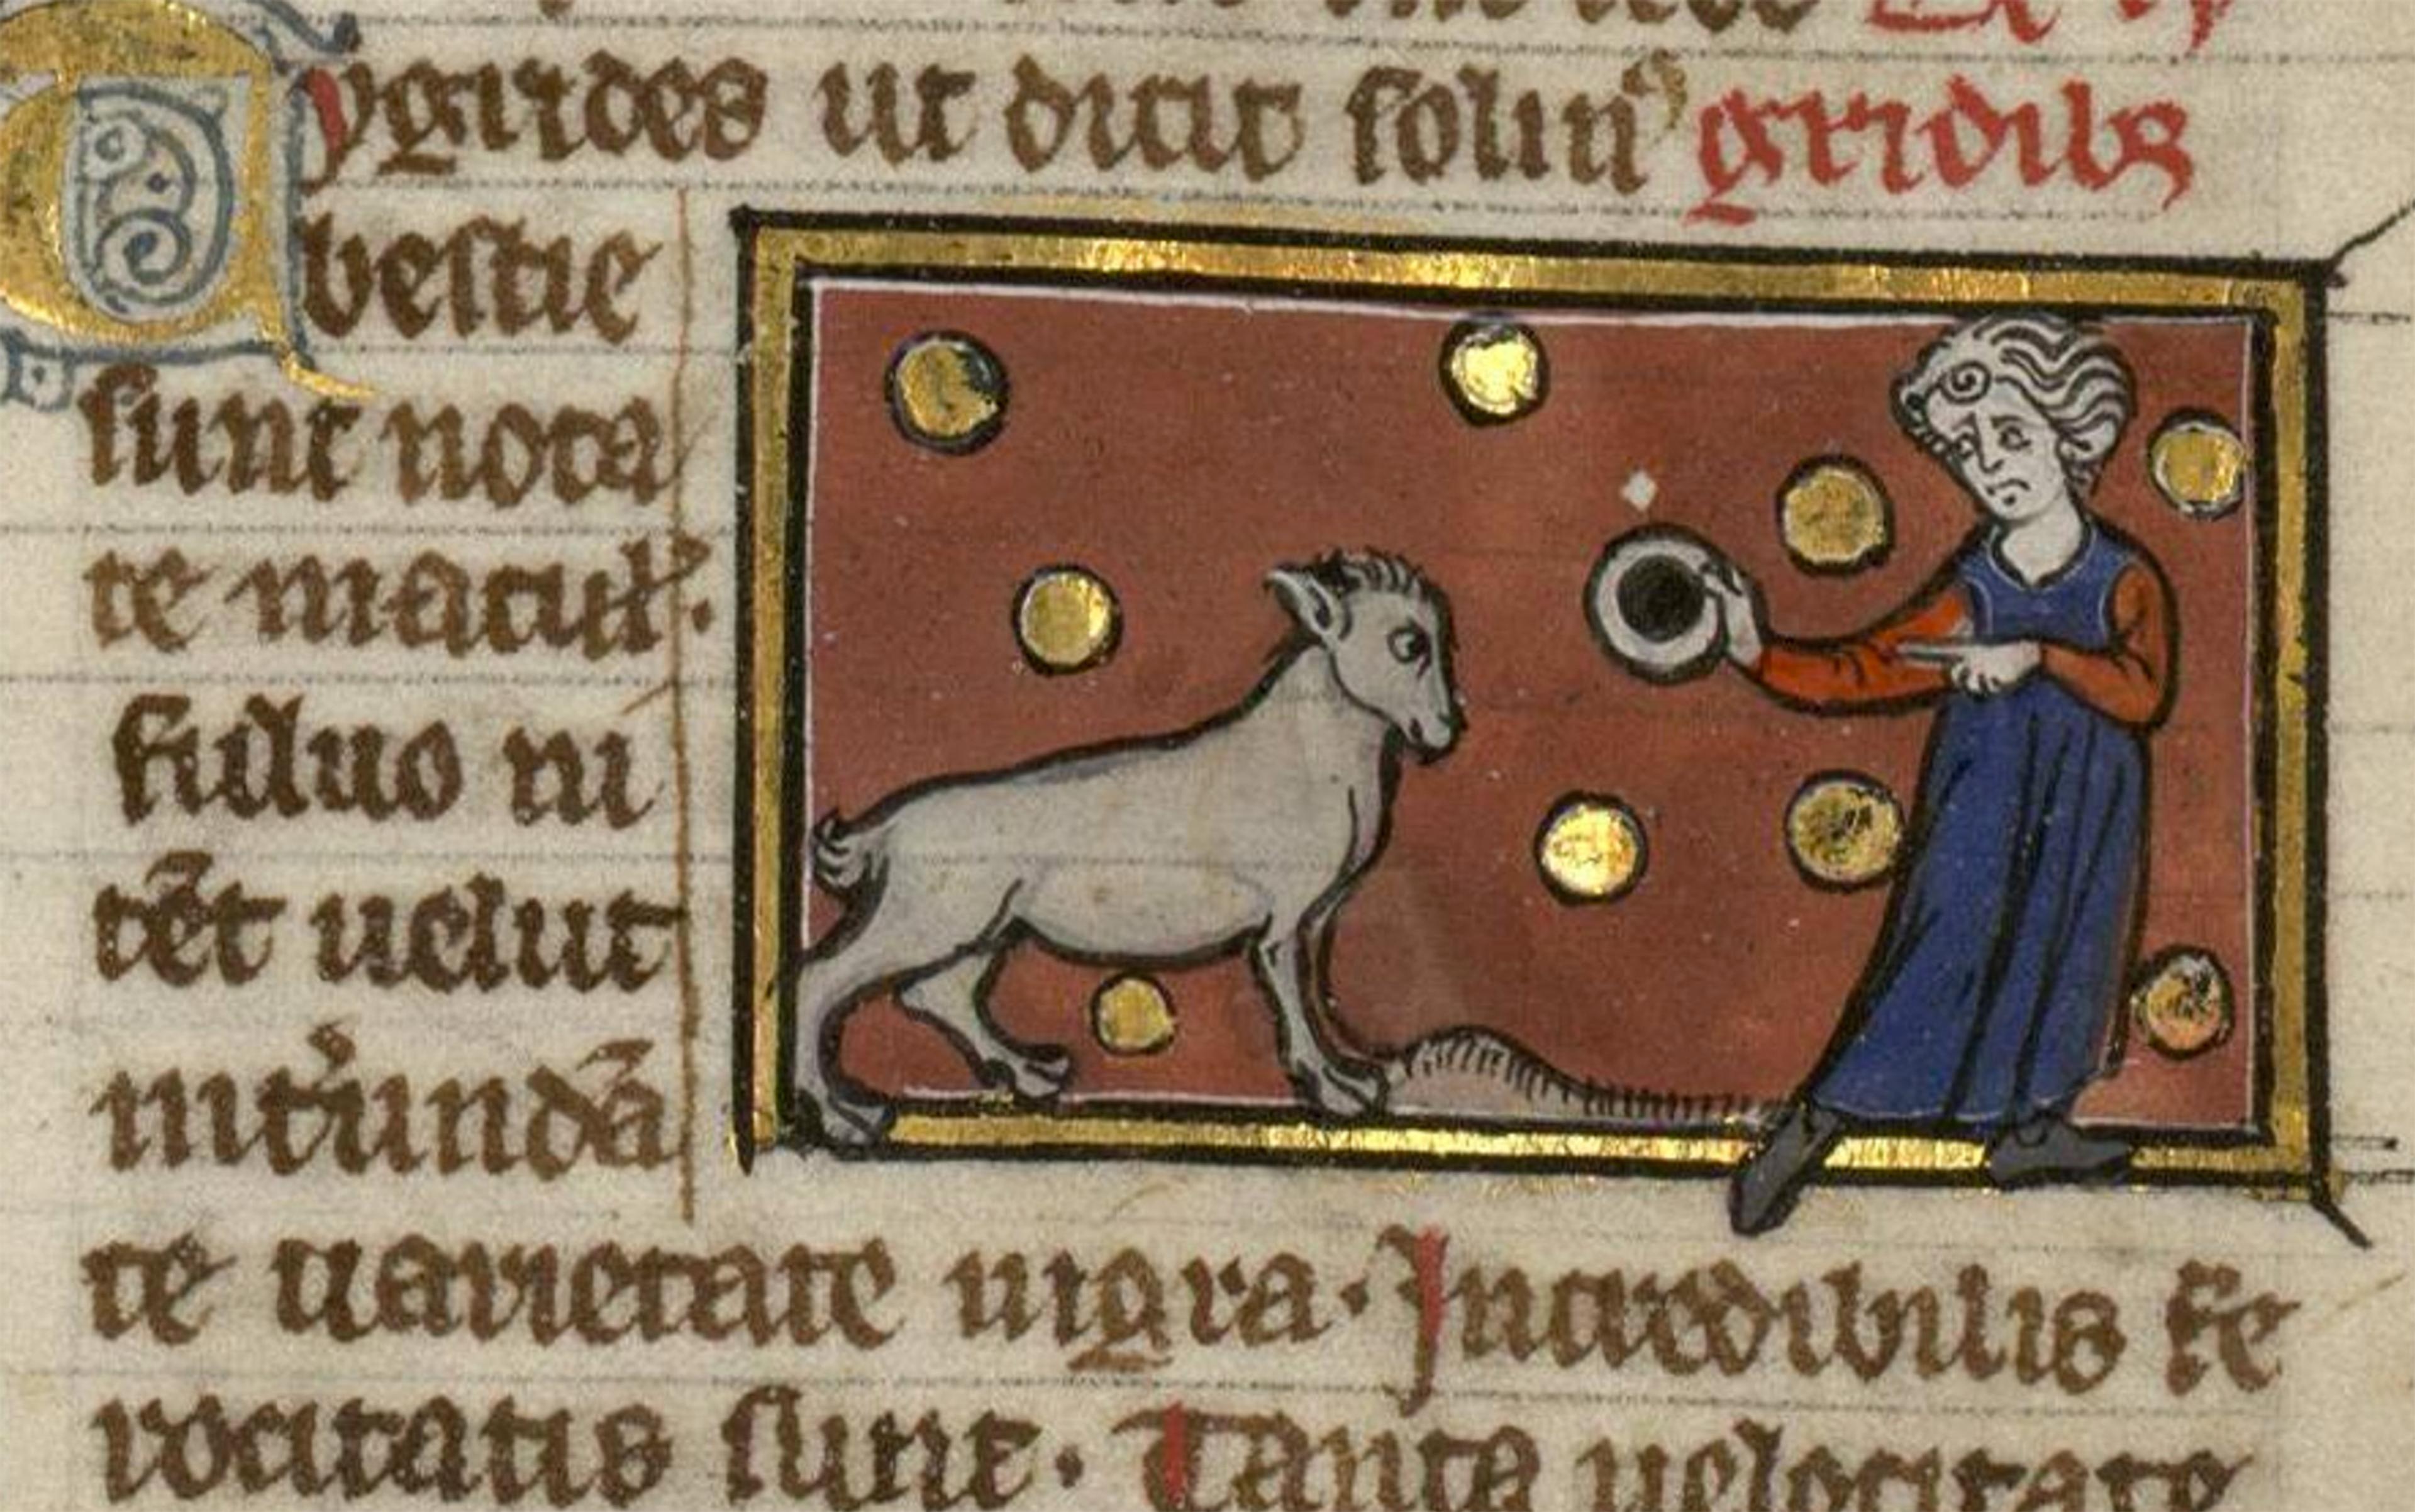 Medieval manuscript illustration of a goat and a person holding a disc, with gold circles in the background, surrounded by text in Latin script.